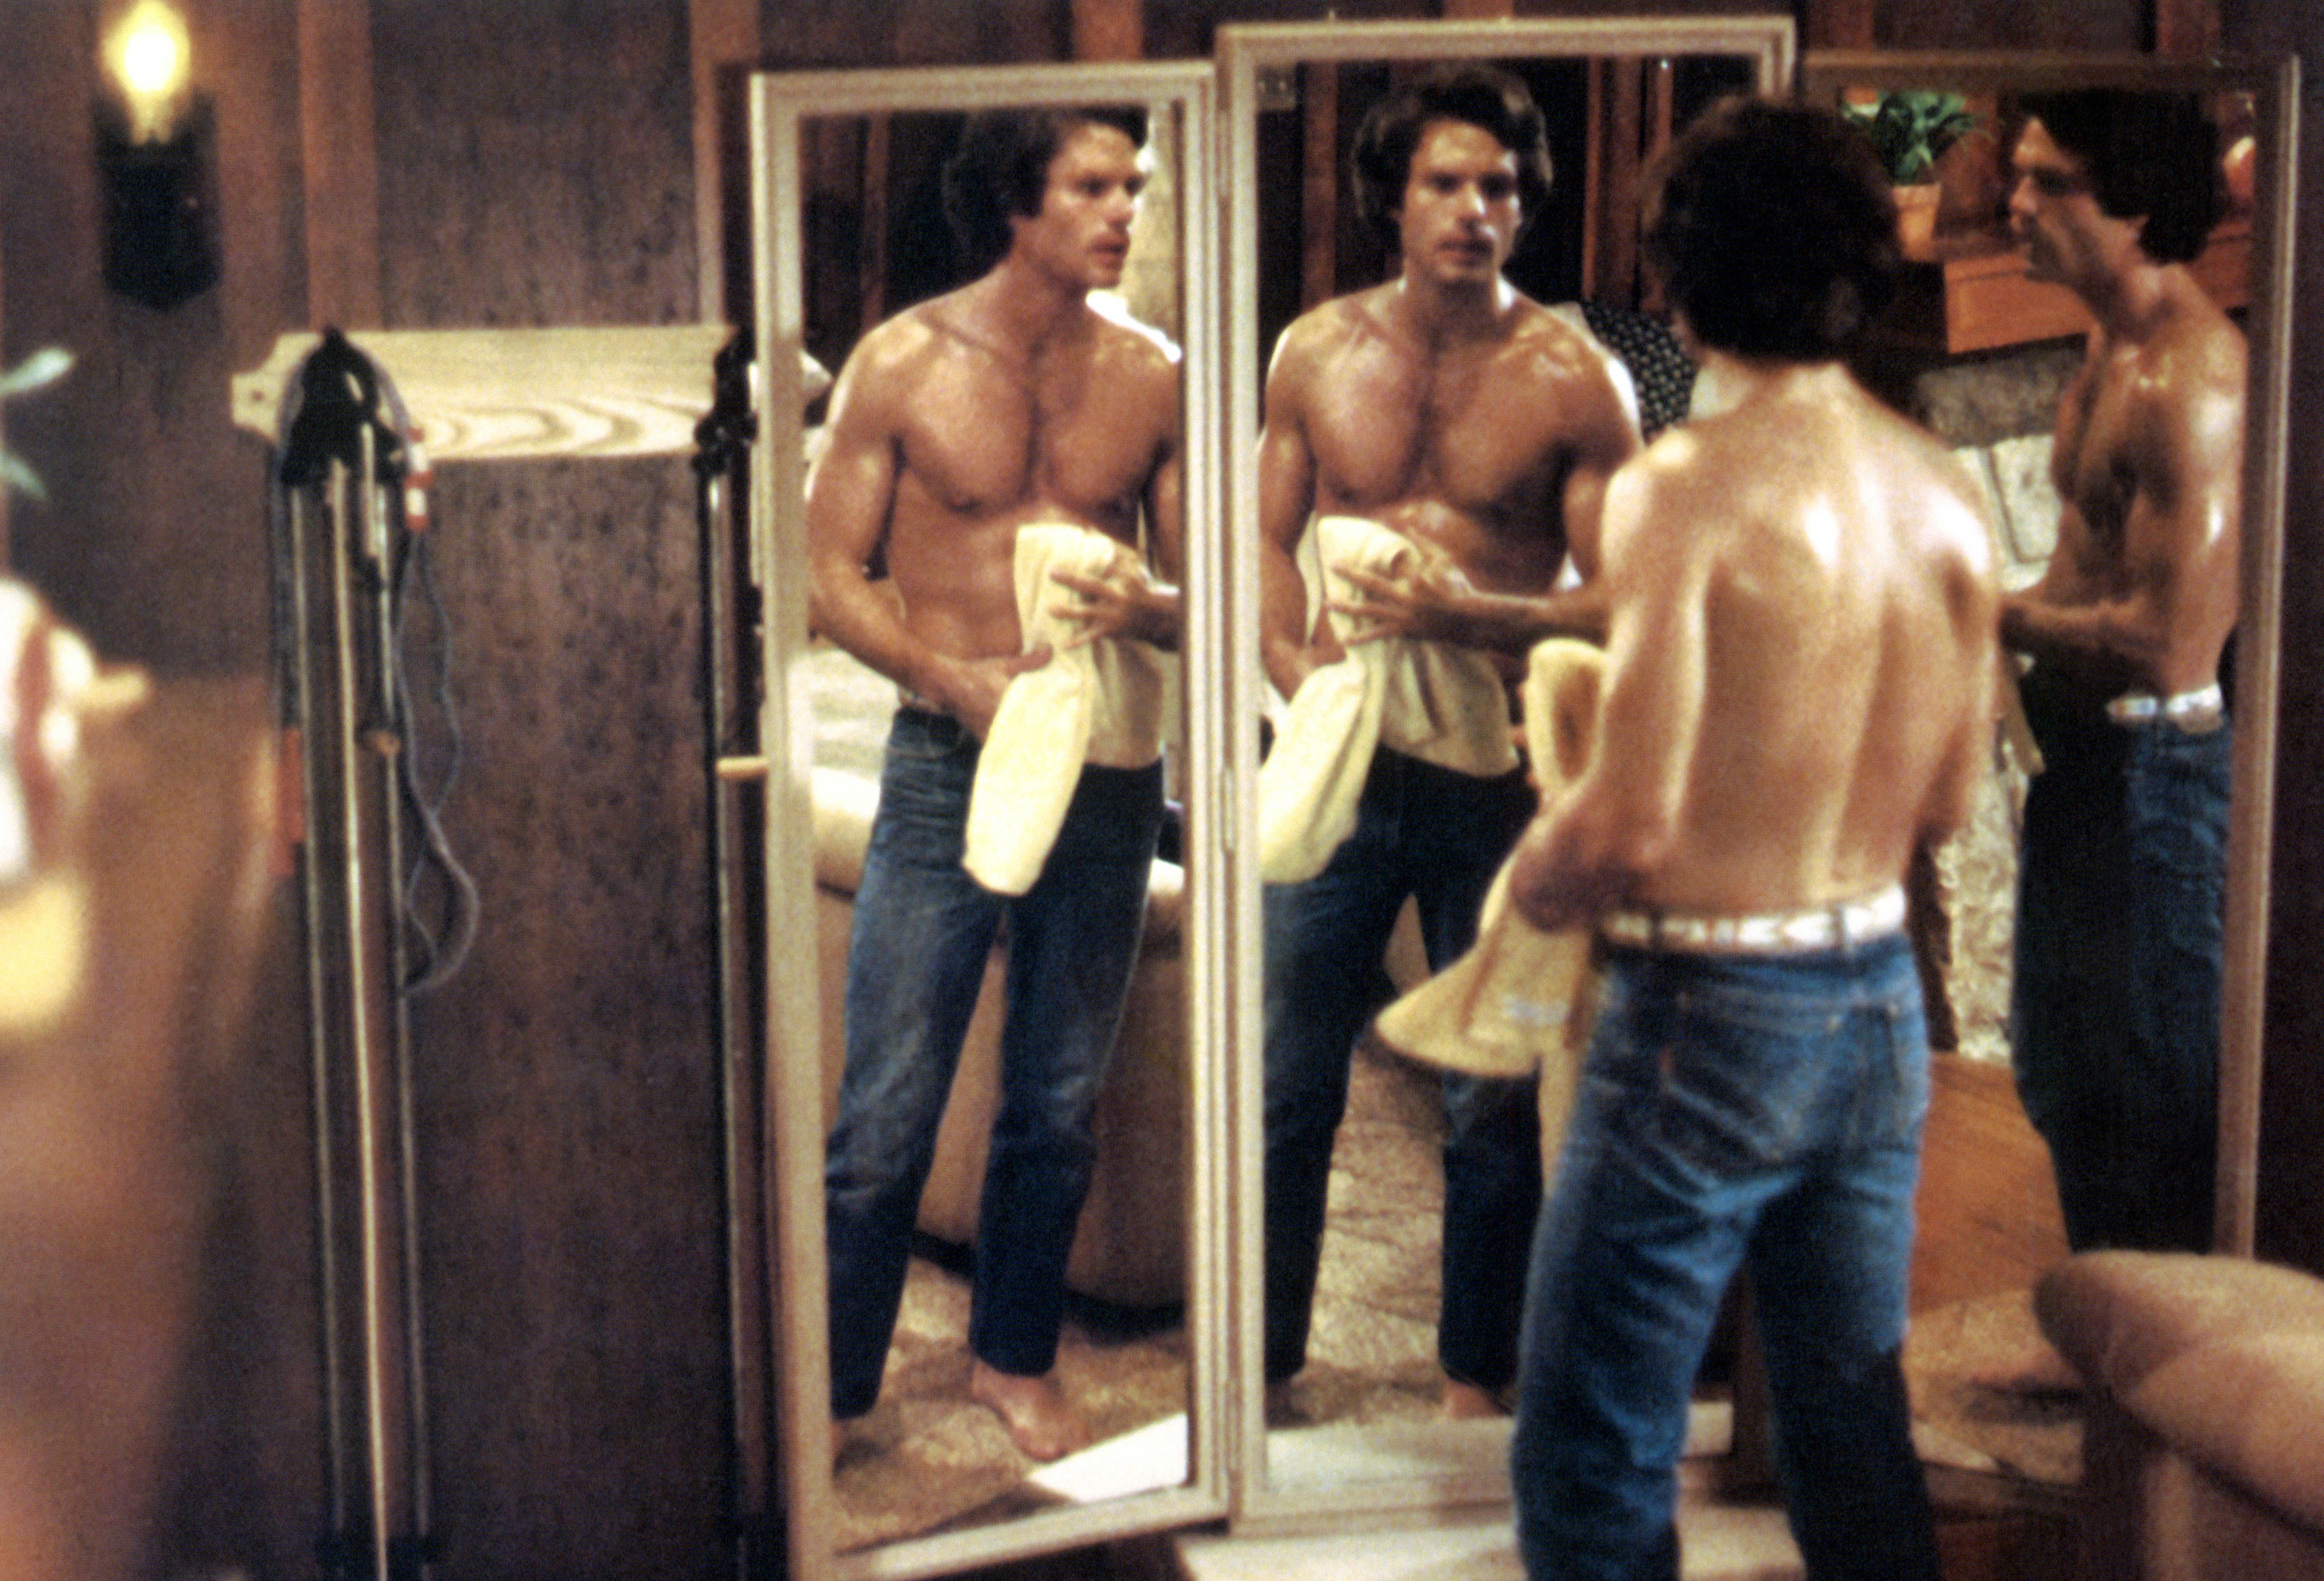 Hamlin in front of the mirror shirtless